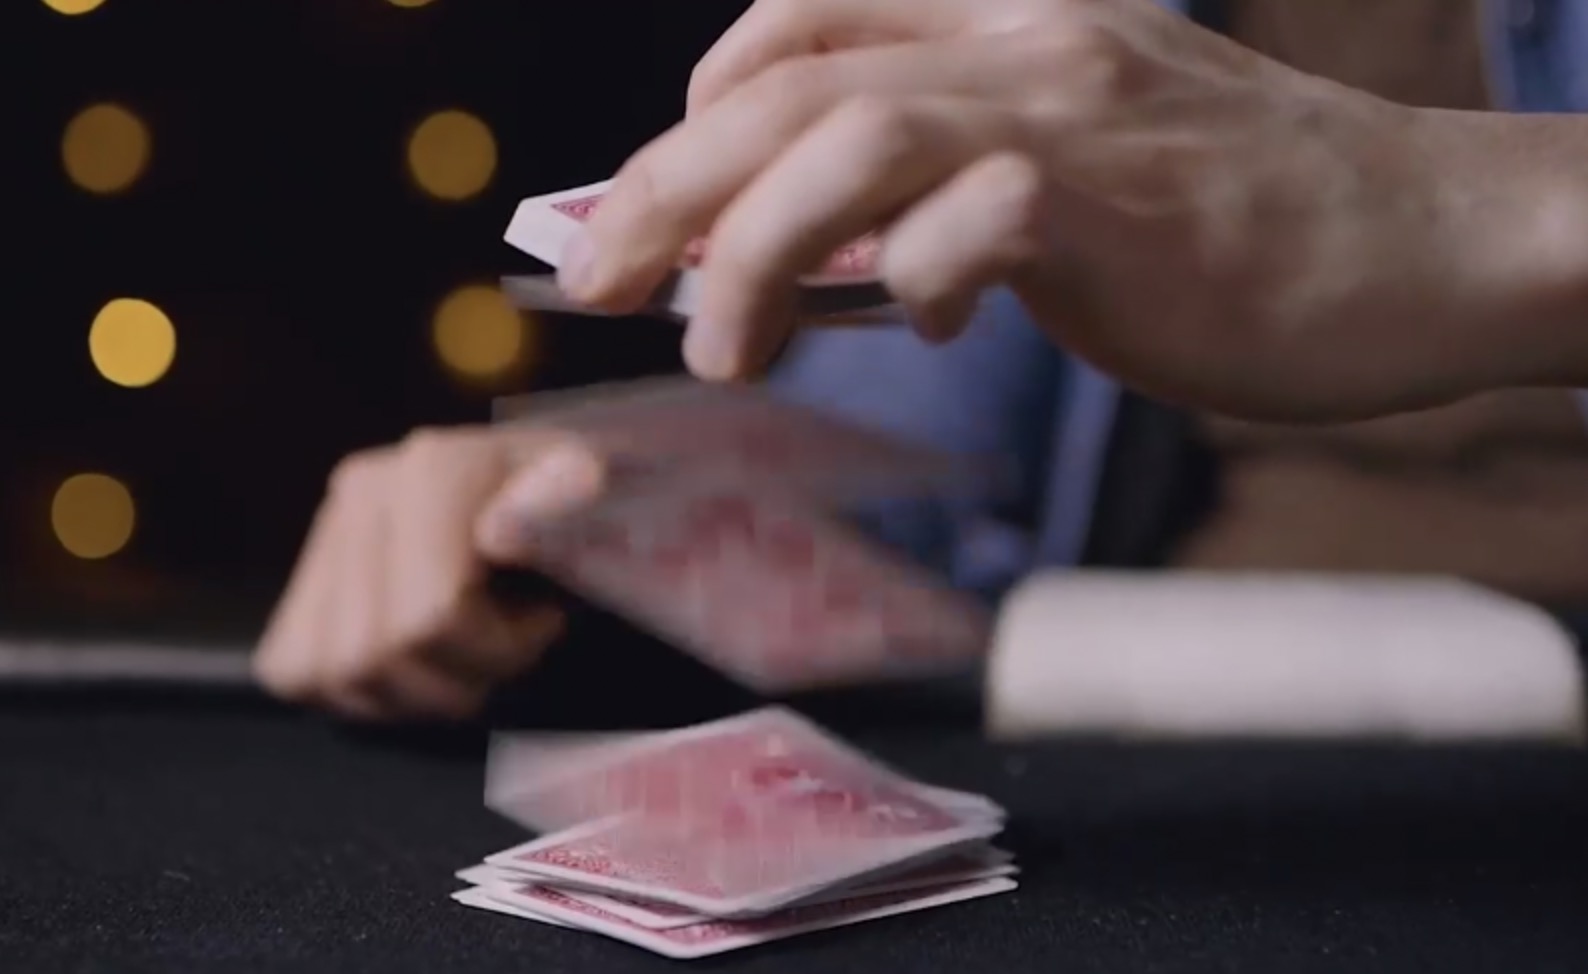 The Art of Magic: Perform Impromptu Magic Tricks with Playing Cards by Tim Domsky (17 Mp4 Videos Download 720p High Quality)